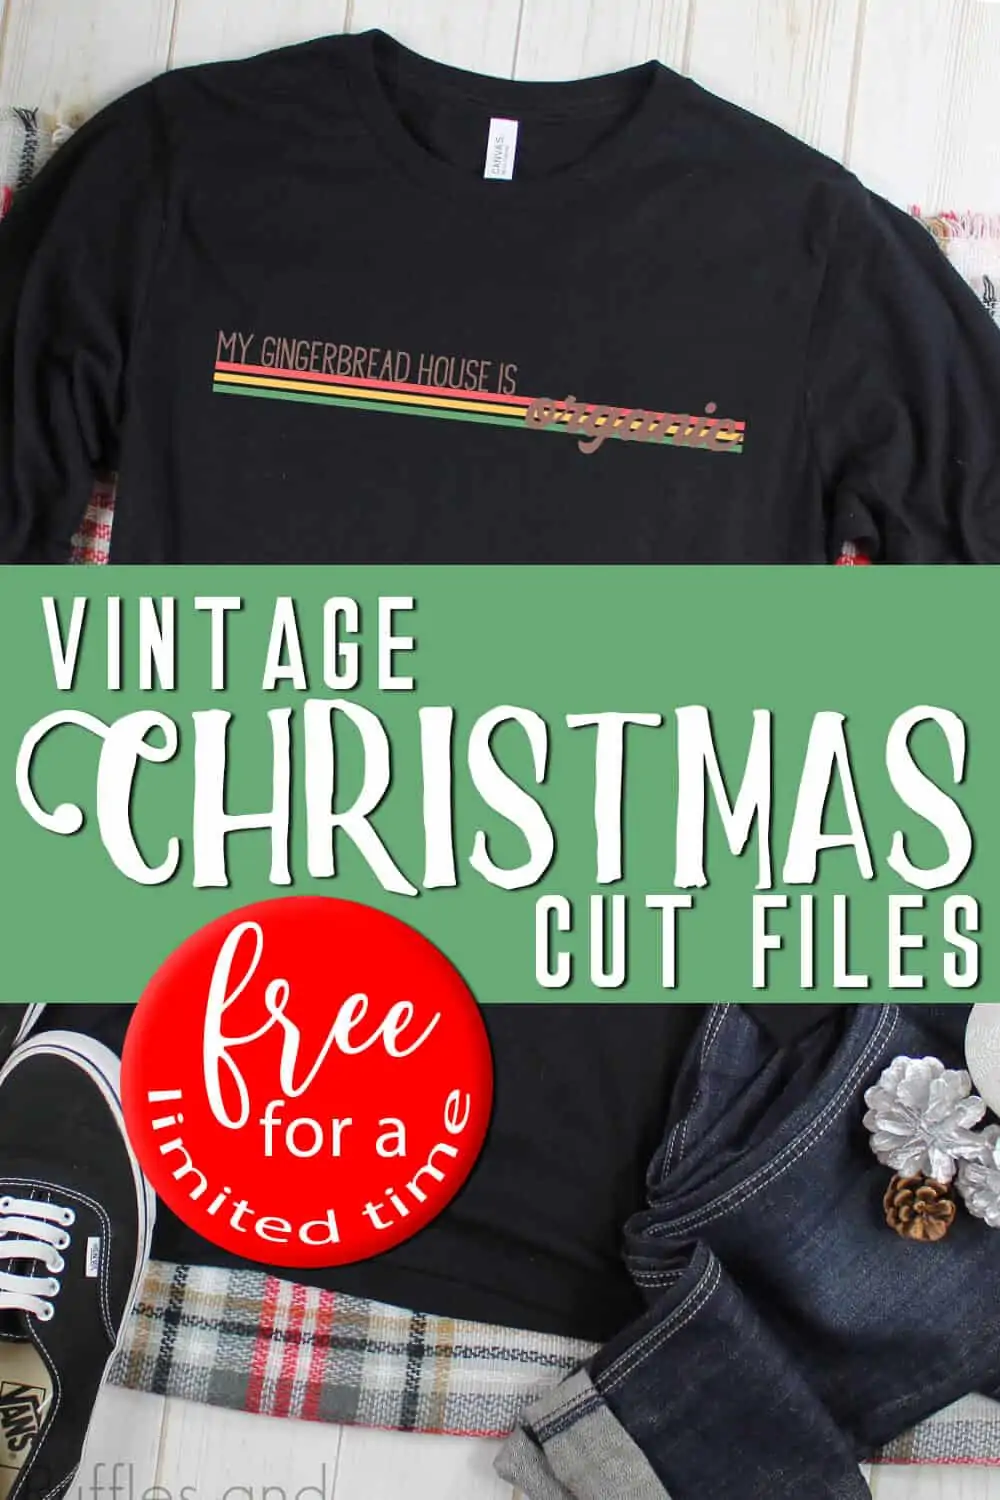 My gingerbread house is organic vintage hipster svg on black t shirt with text which reads vintage Christmas cut files